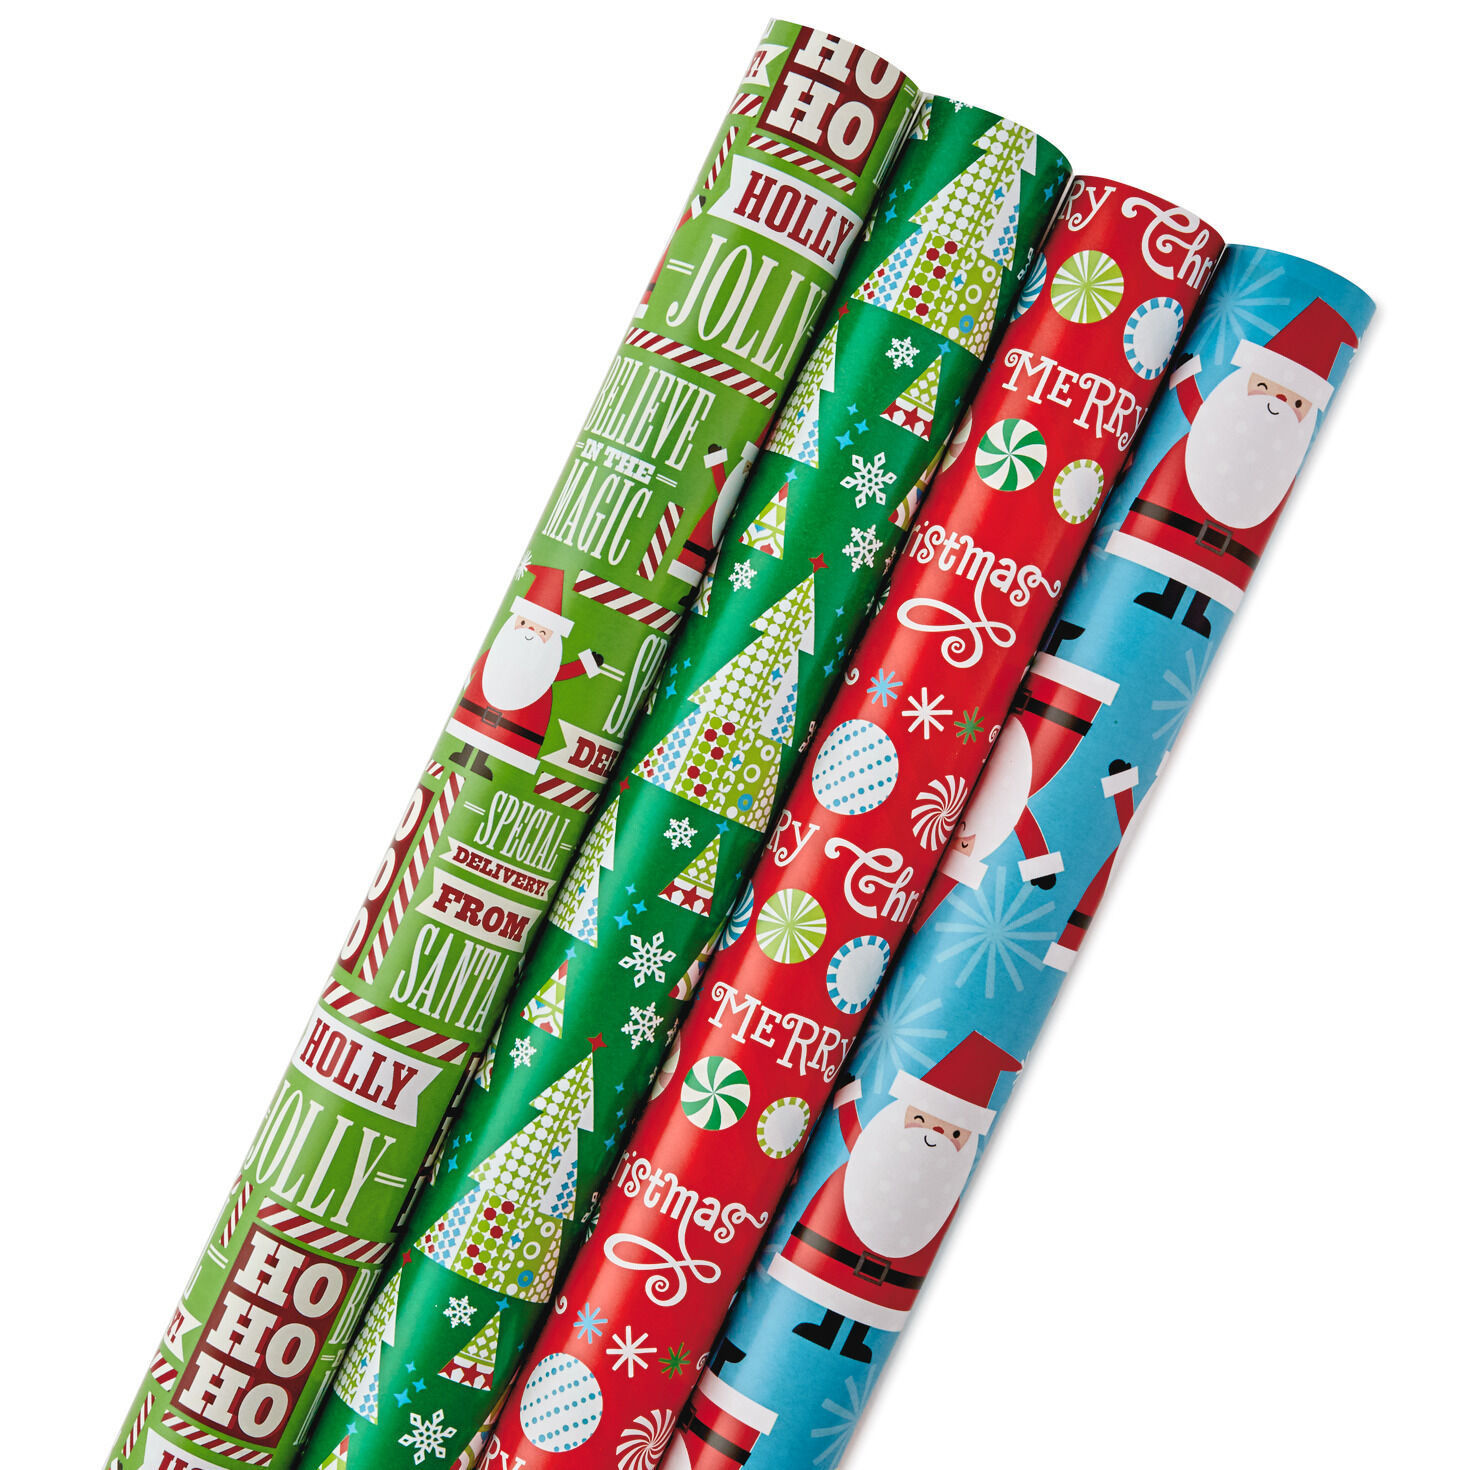 150 Sheet Count Gift Wrapping Tissue Paper - Assorted - Sam's Club